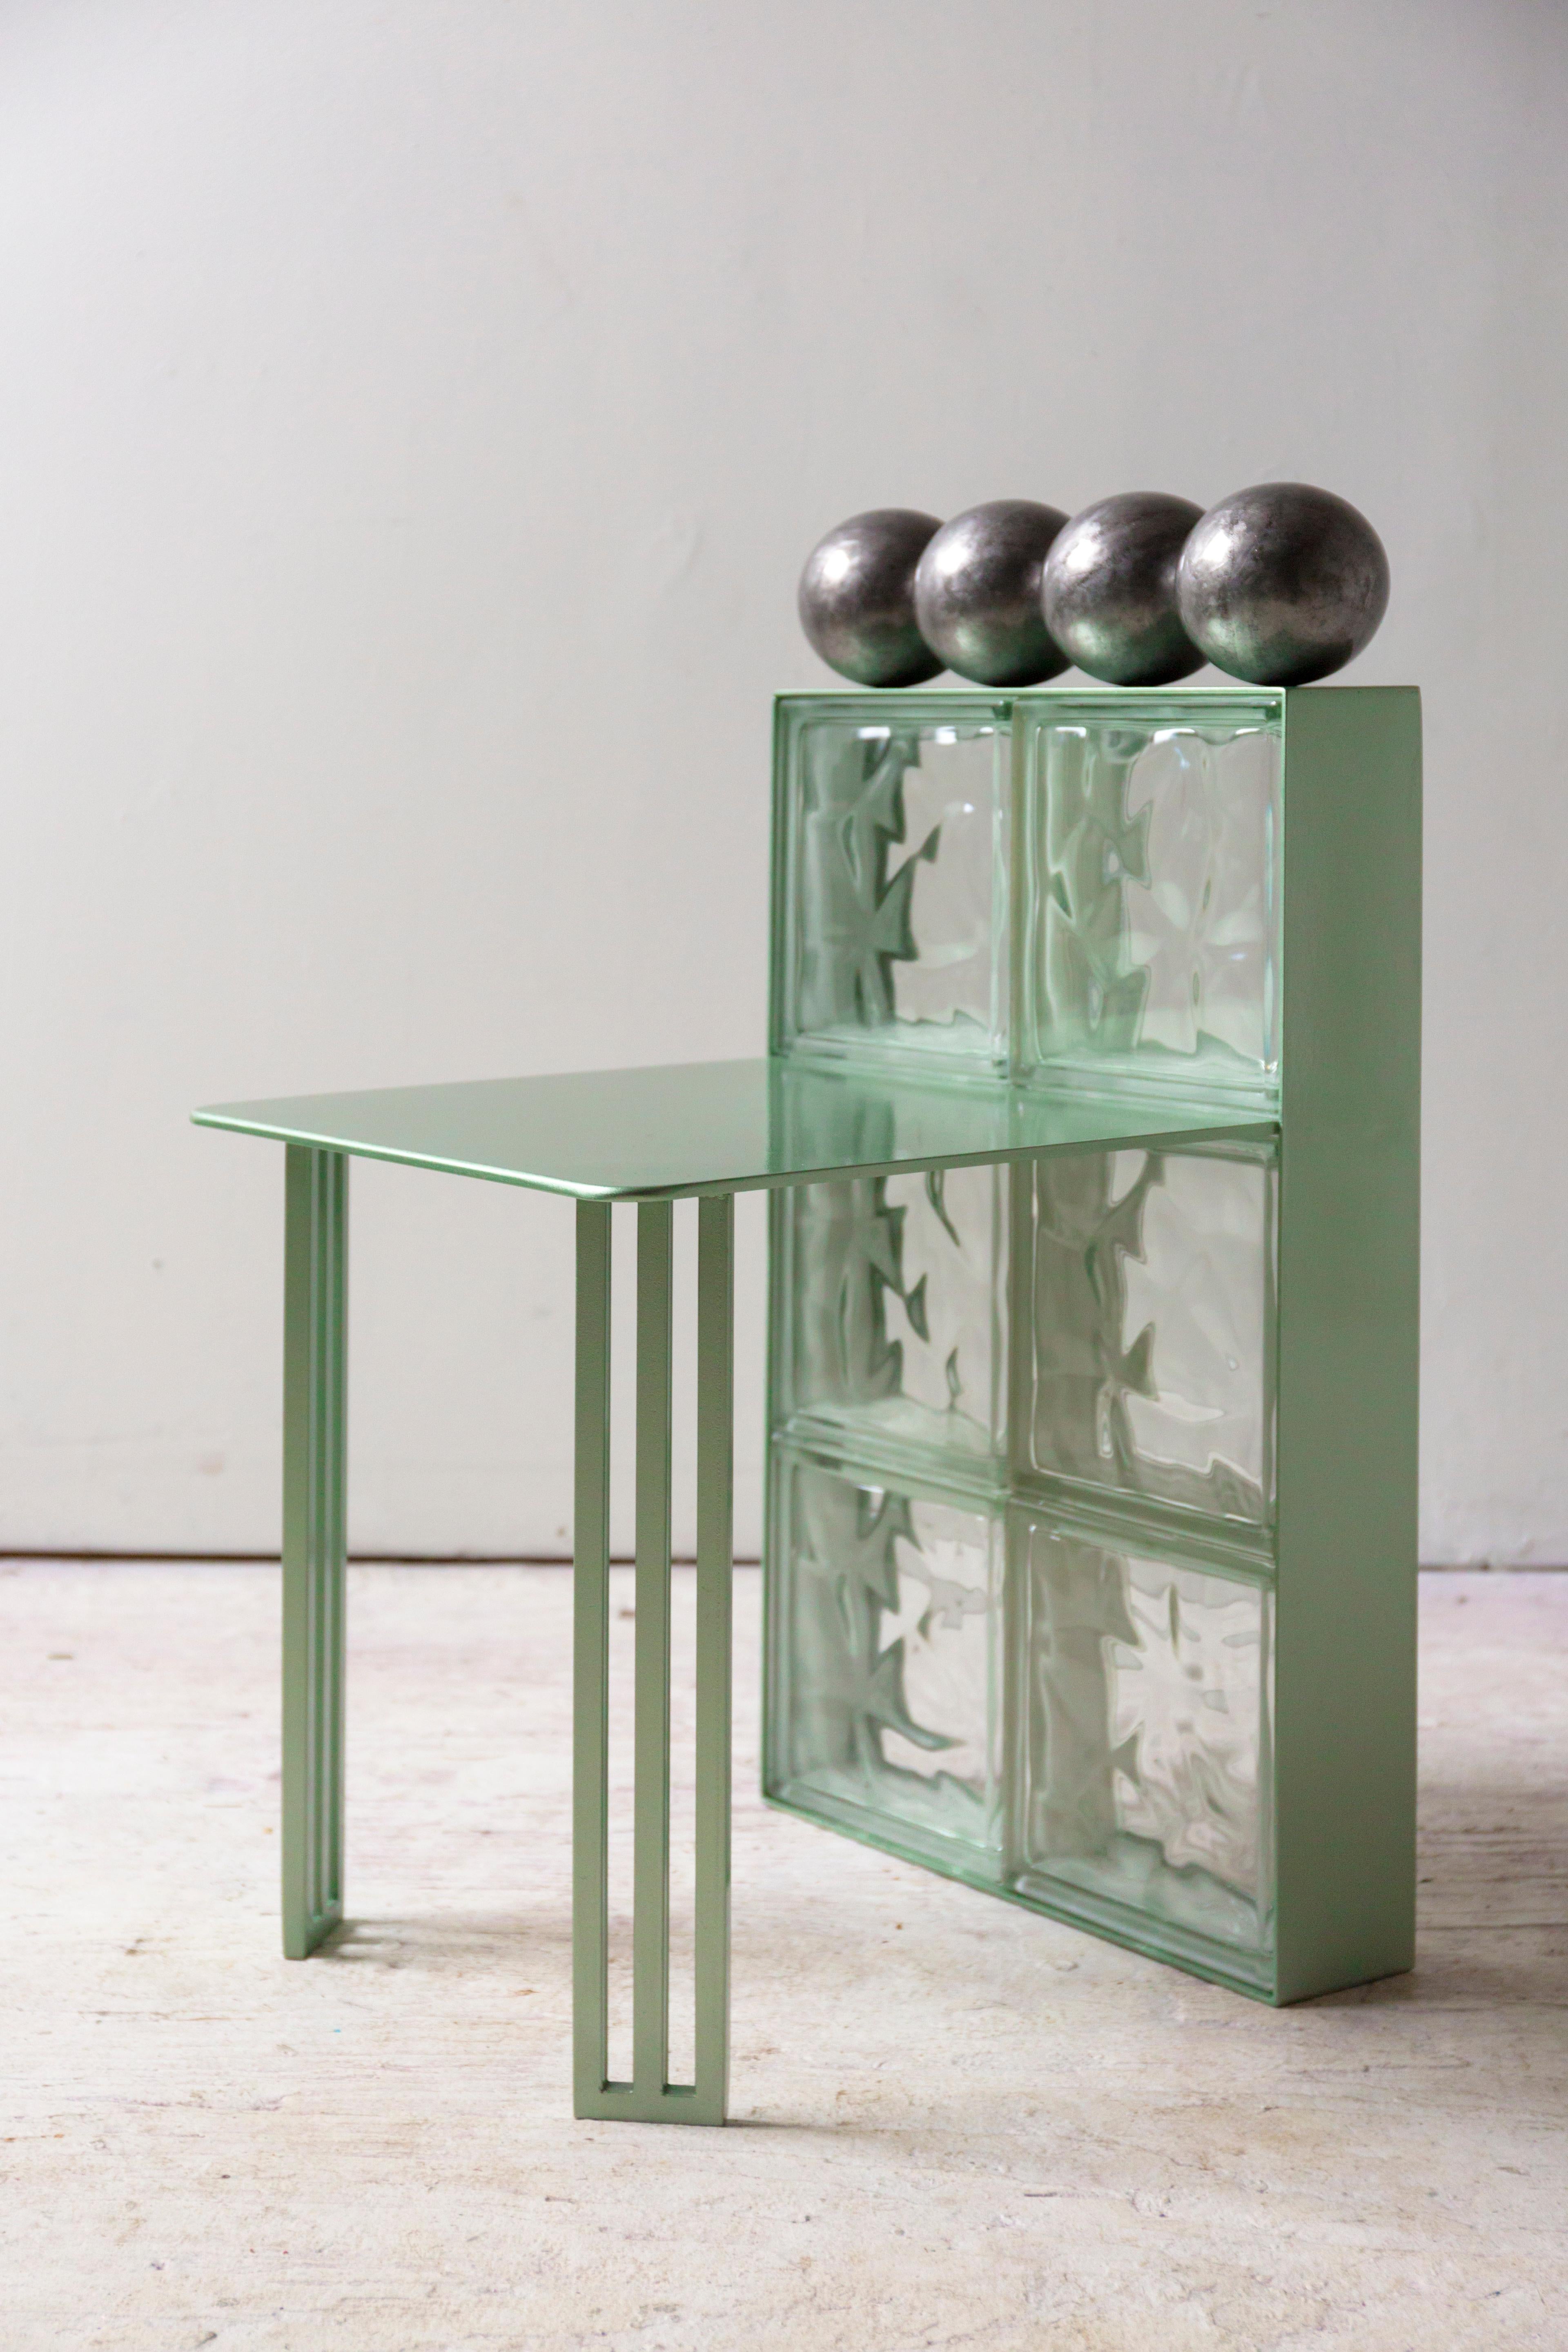 This compact steel chair is a nod to glass block architecture and playful geometry. Four welded iron balls create an illusion of balance along the solid glass block wall that acts as a back rest. The gentle green metallic finish highlights the